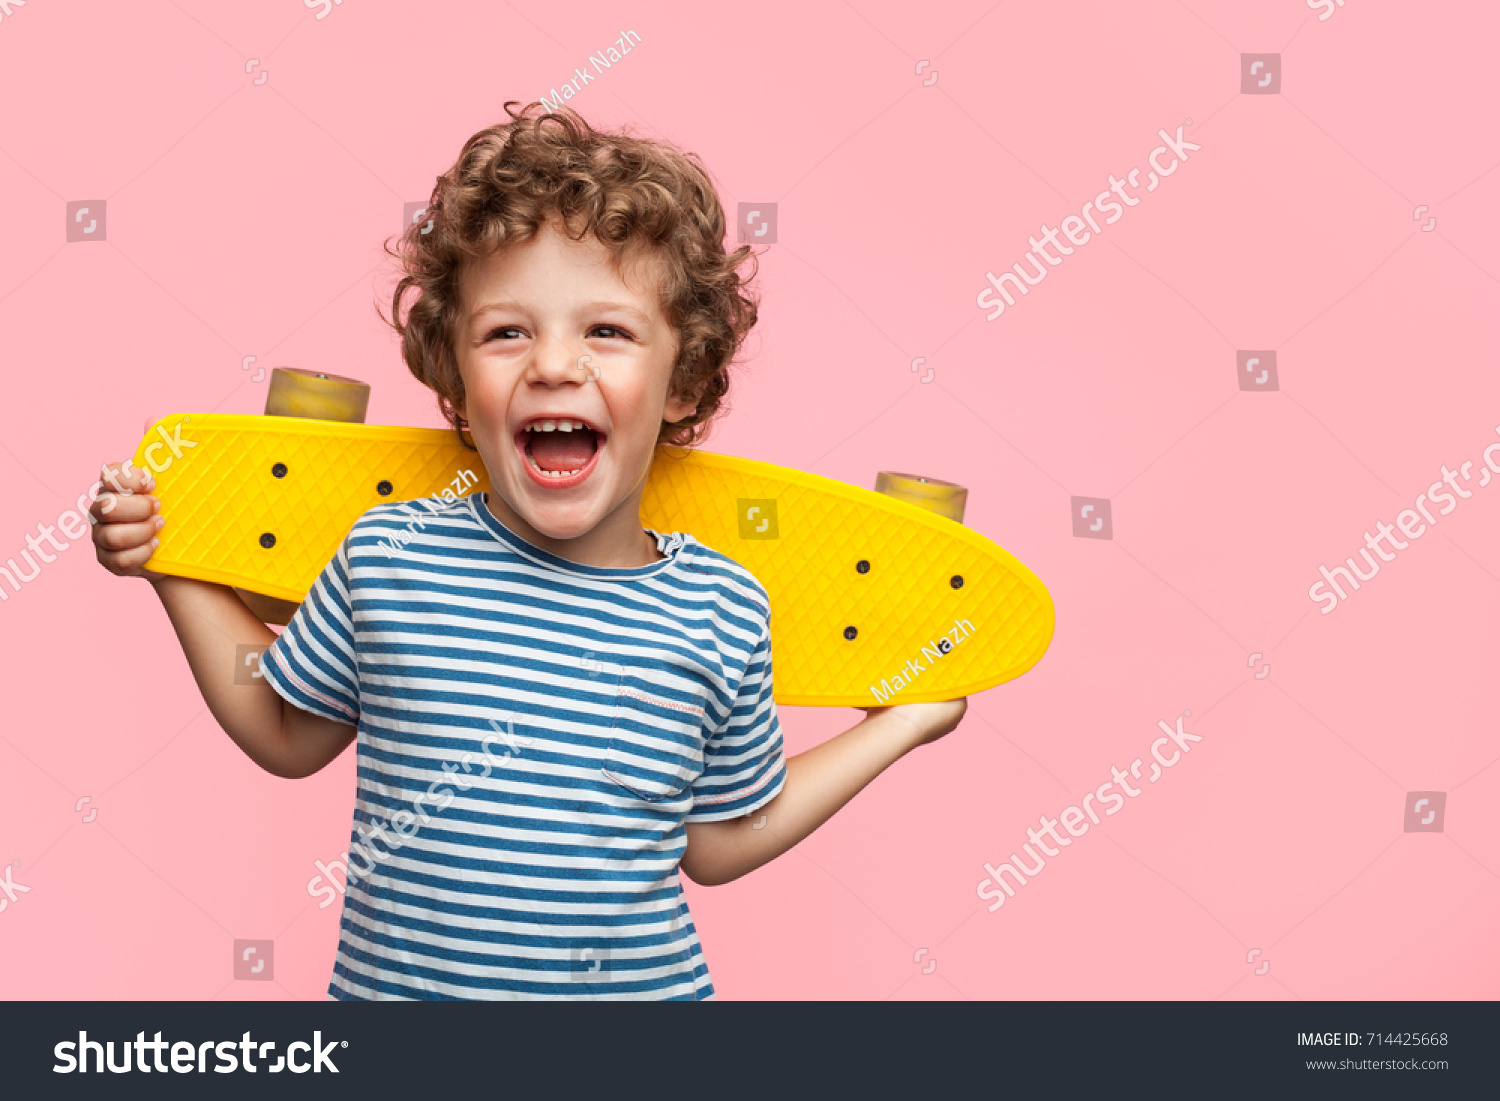 Charming curly boy holding yellow longboard and looking away on pink background.  #714425668